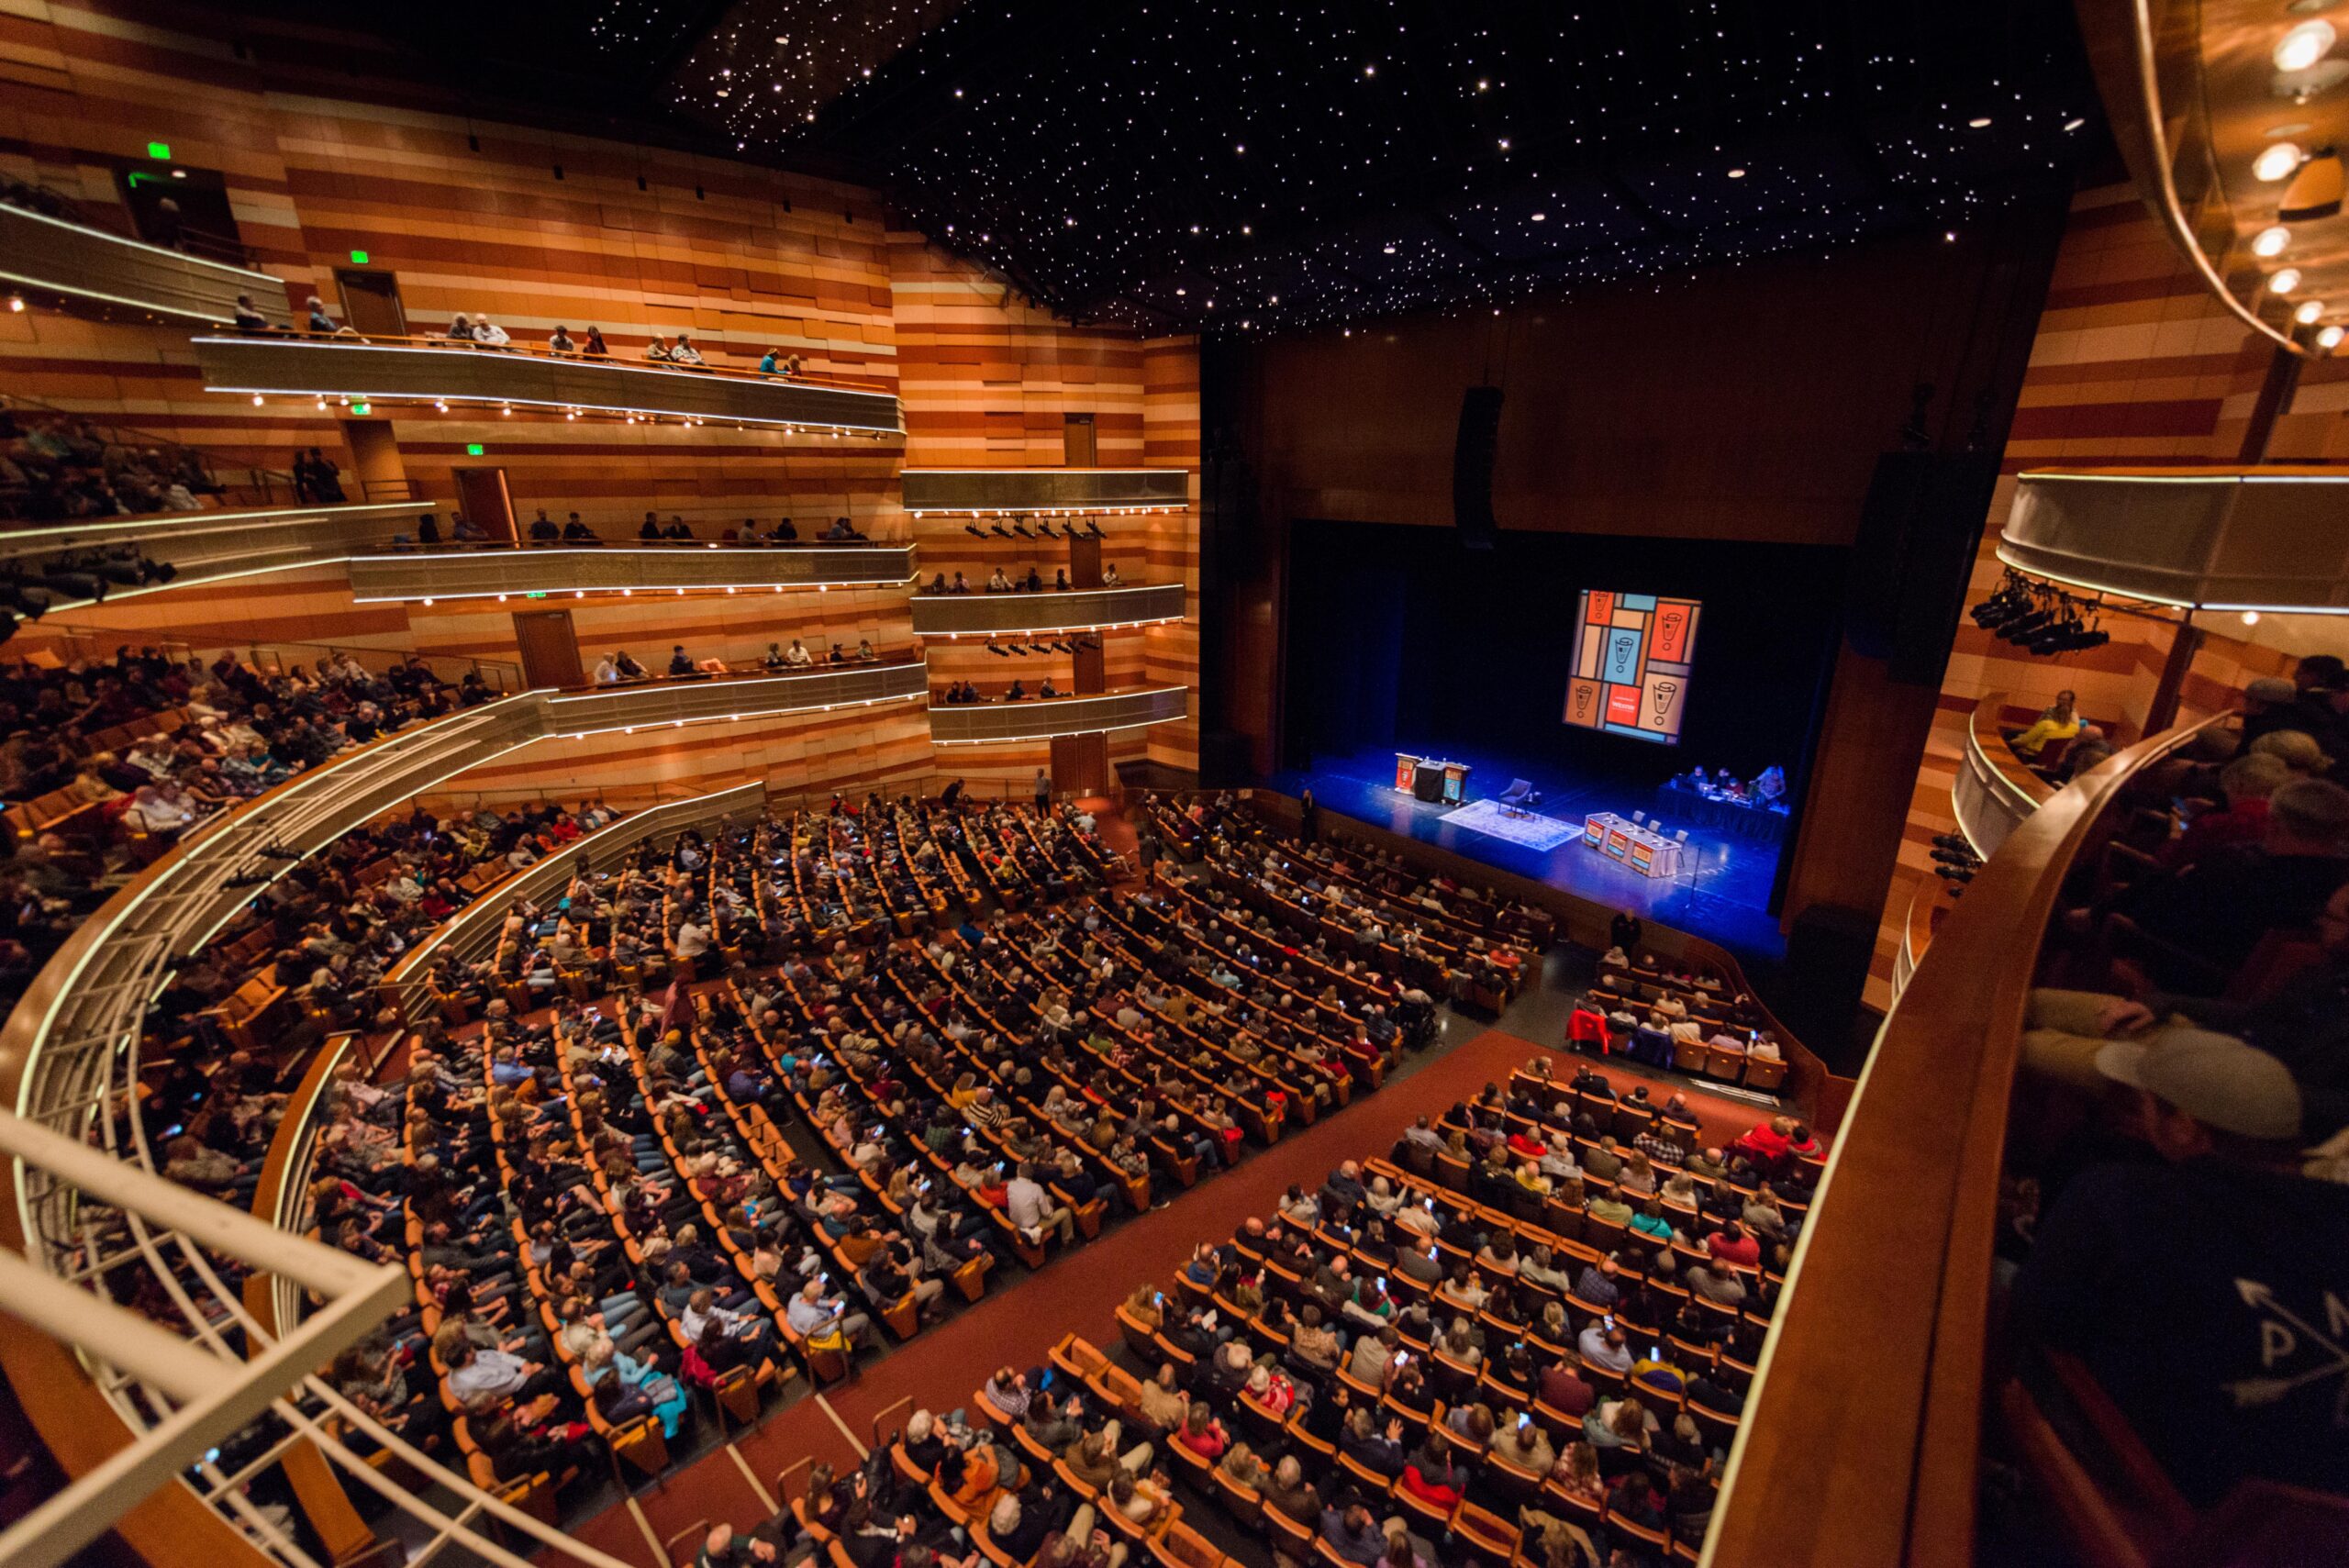 NPR's Wait Wait... Don't Tell Me! celebrates its 1000th live show for a sold out audience in Salt Lake City, UT